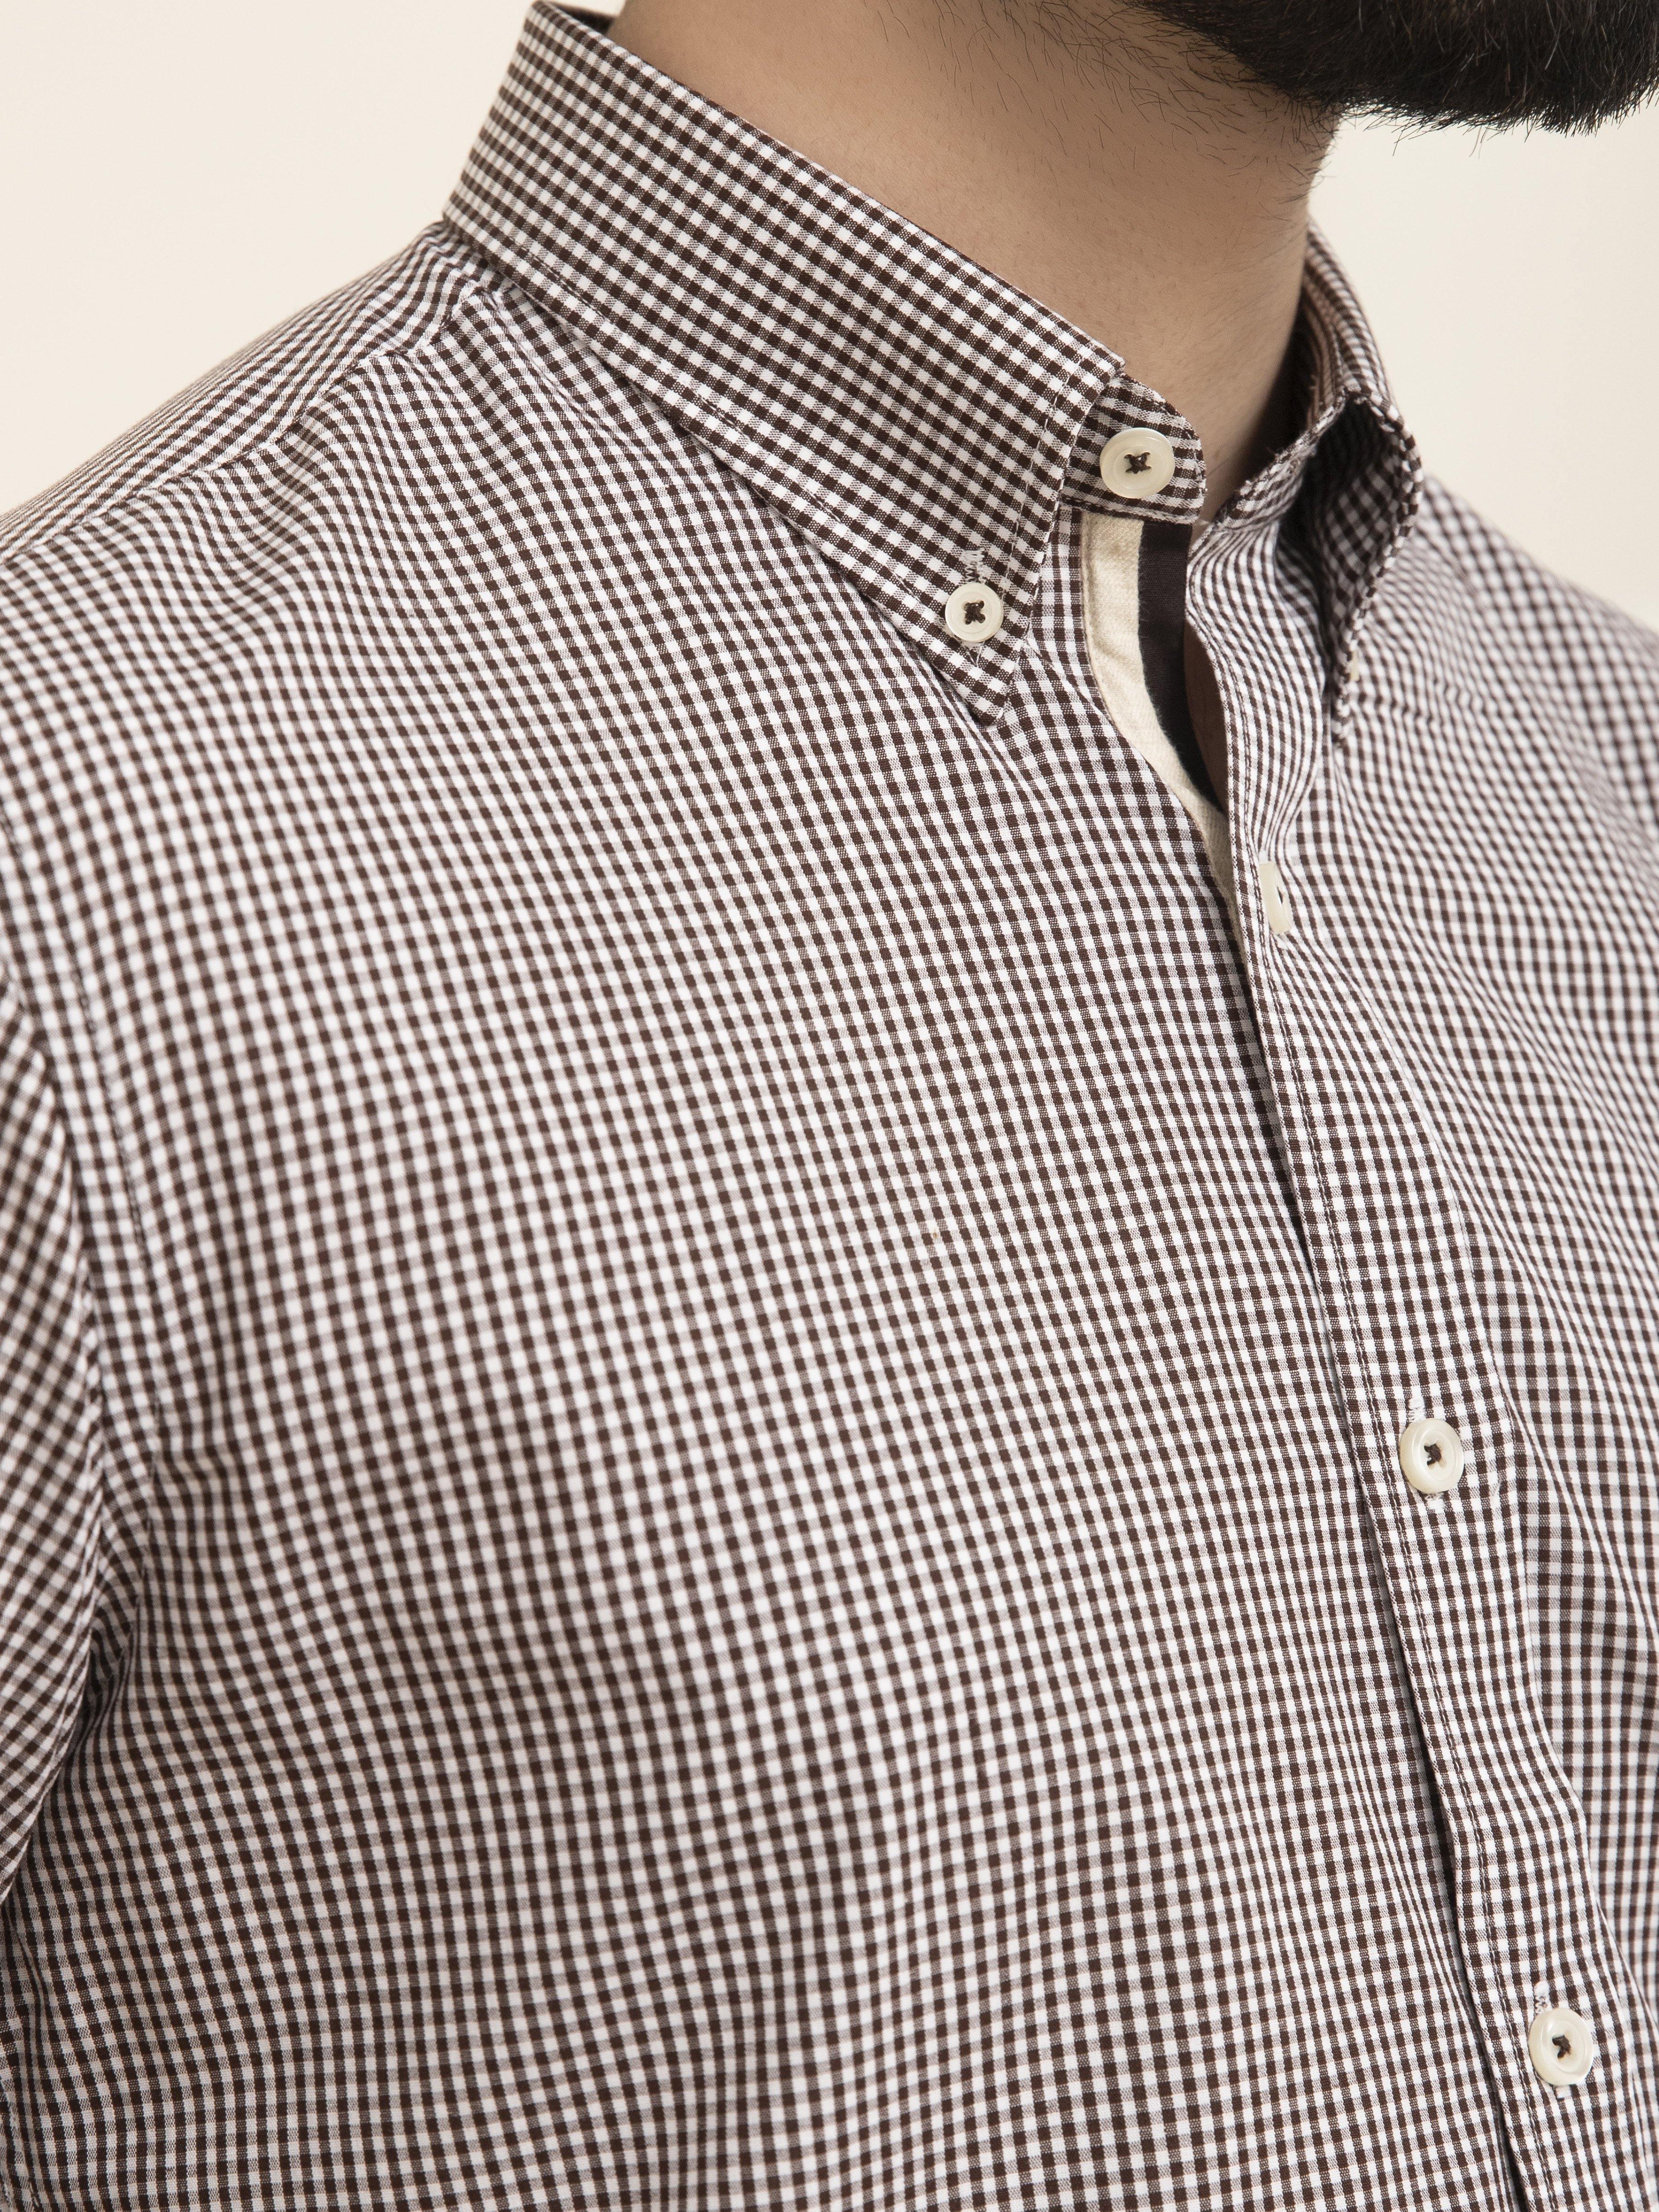 SEMI FORMAL SHIRT FULL SLEEVE BUTTON DOWN BROWN WHITE at Charcoal Clothing